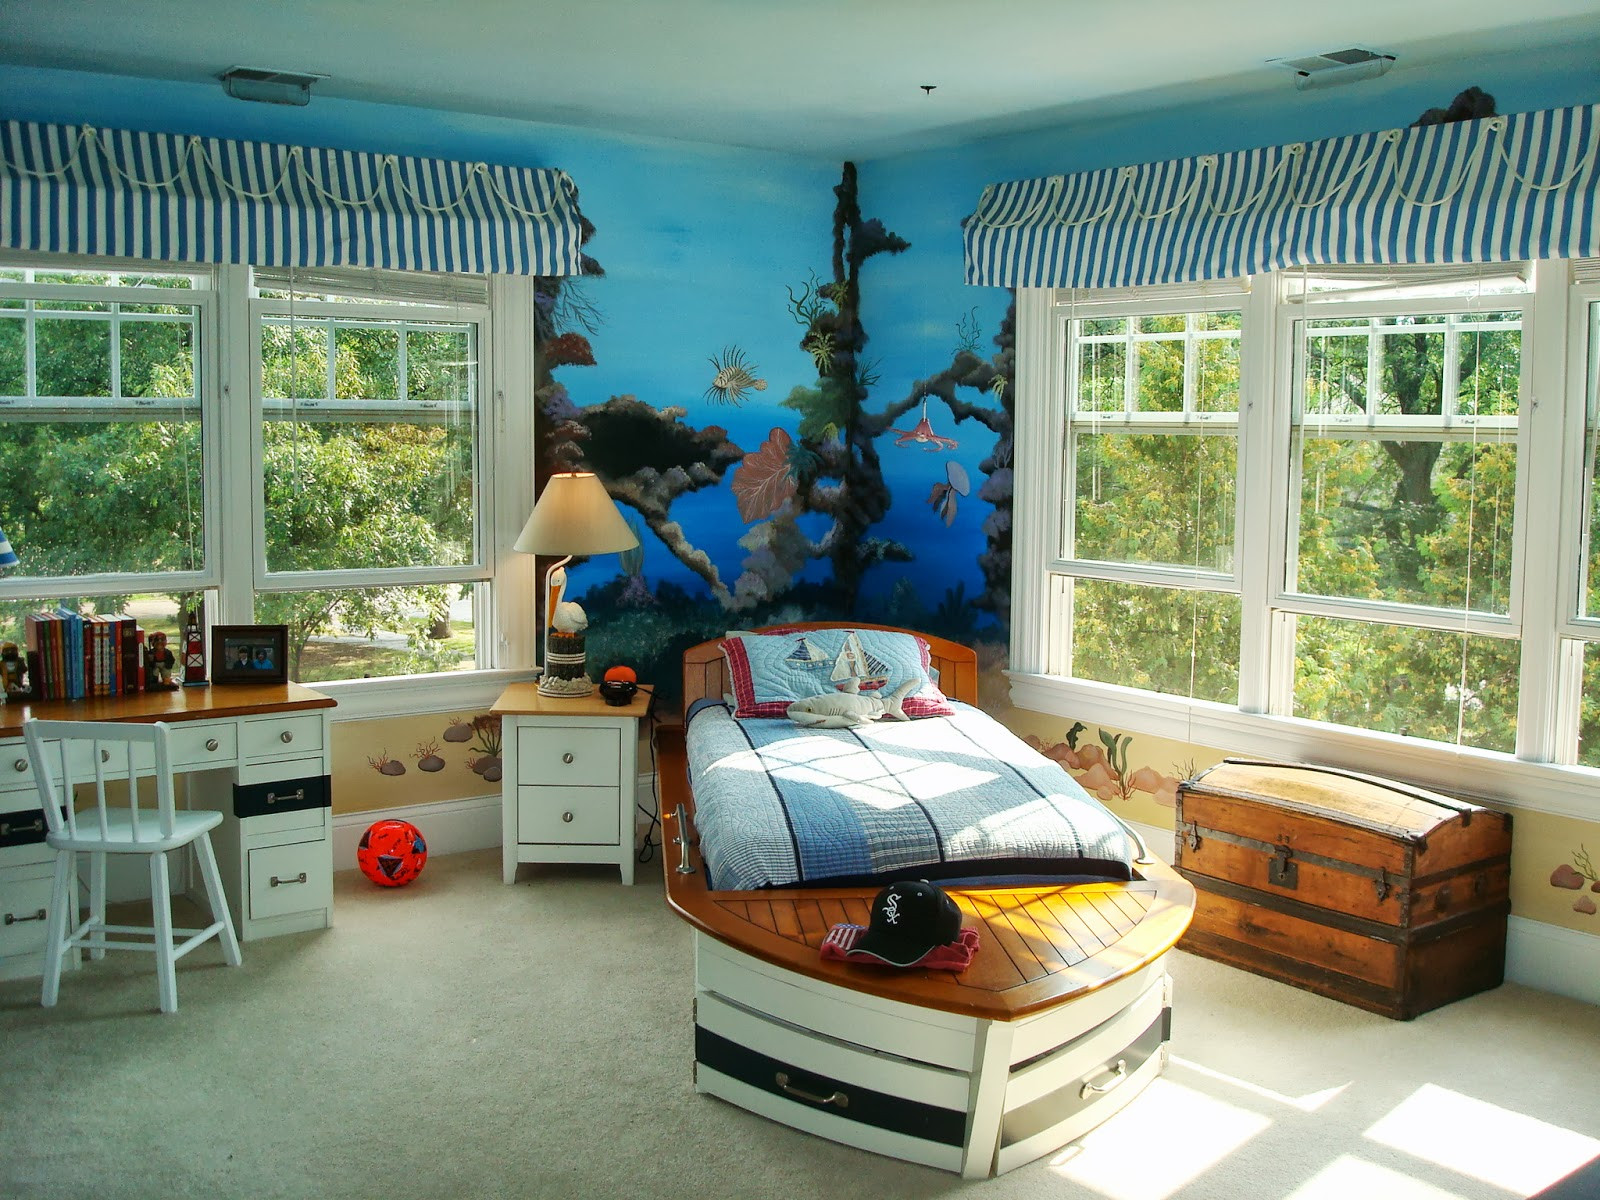 Cool Kids Bedroom Theme Ideas
 10 Ways to Decorate Your Kid’s Bedroom